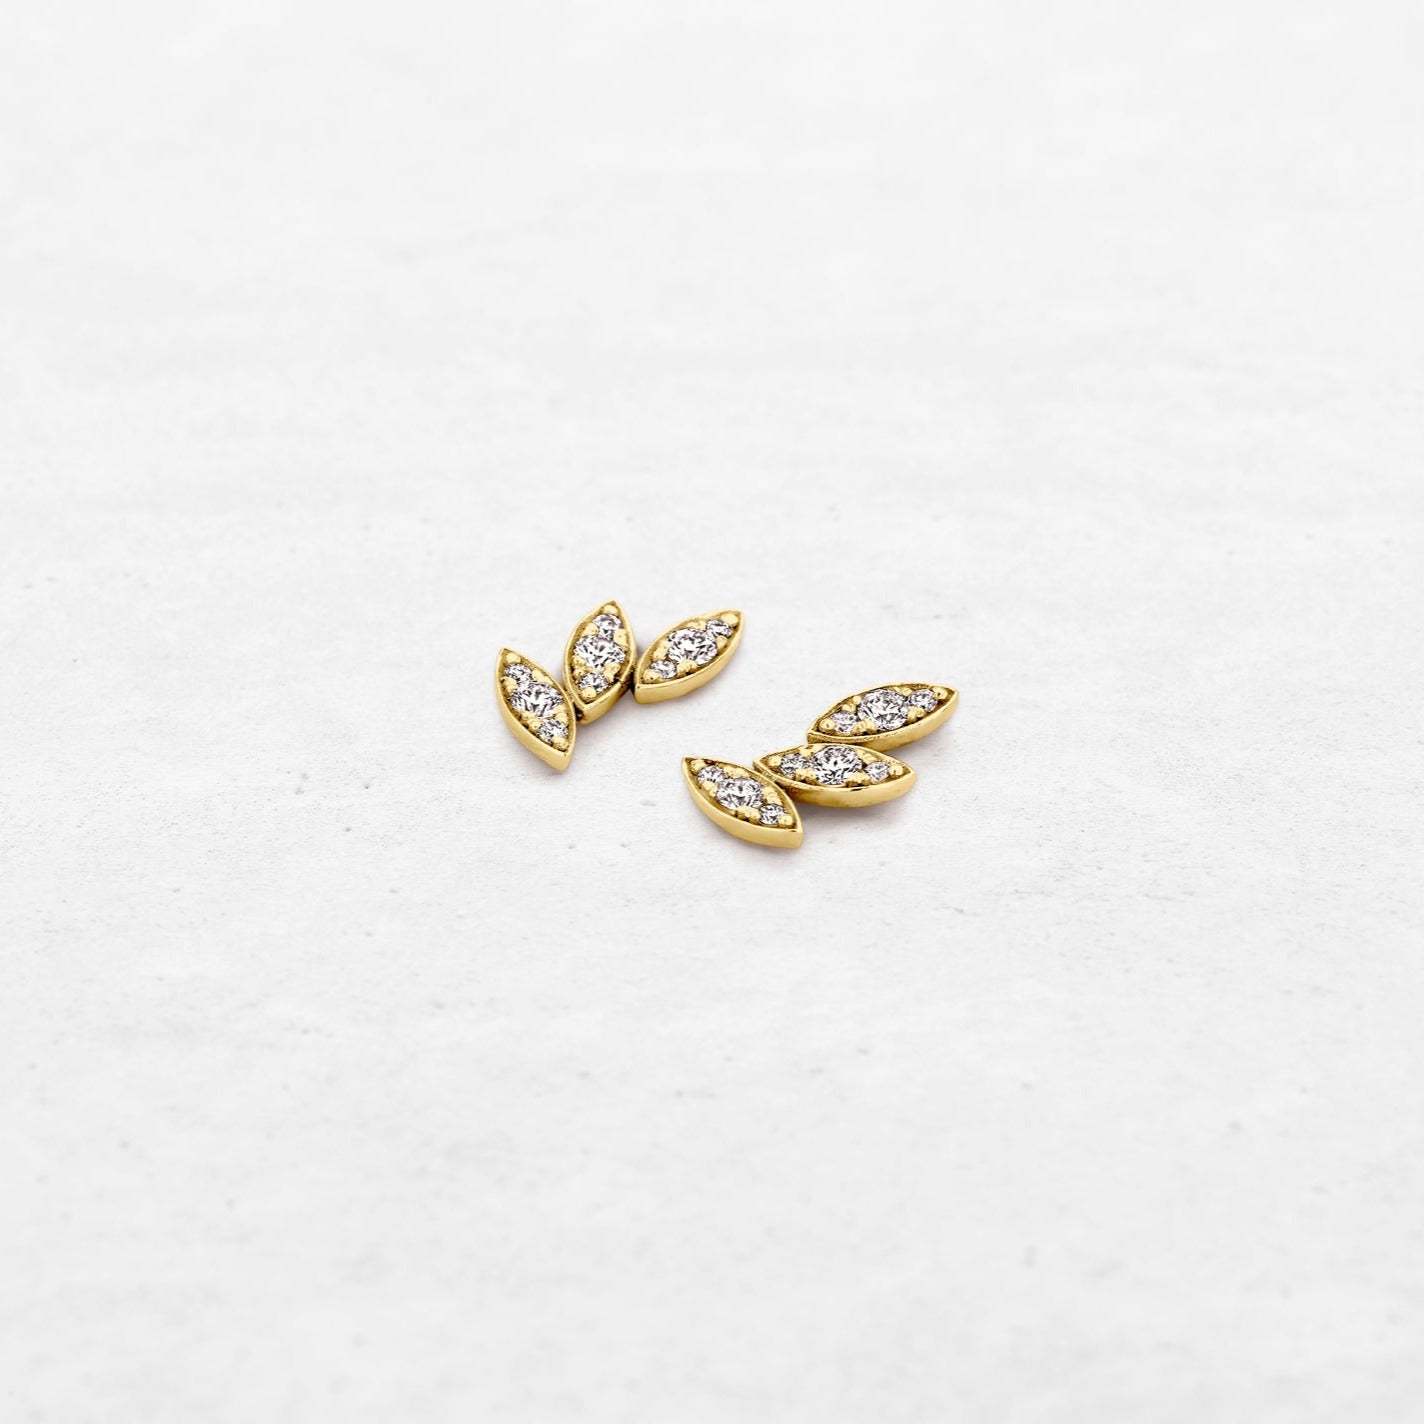 Diamond leaf earring studs in yellow gold made by O! Jewelry